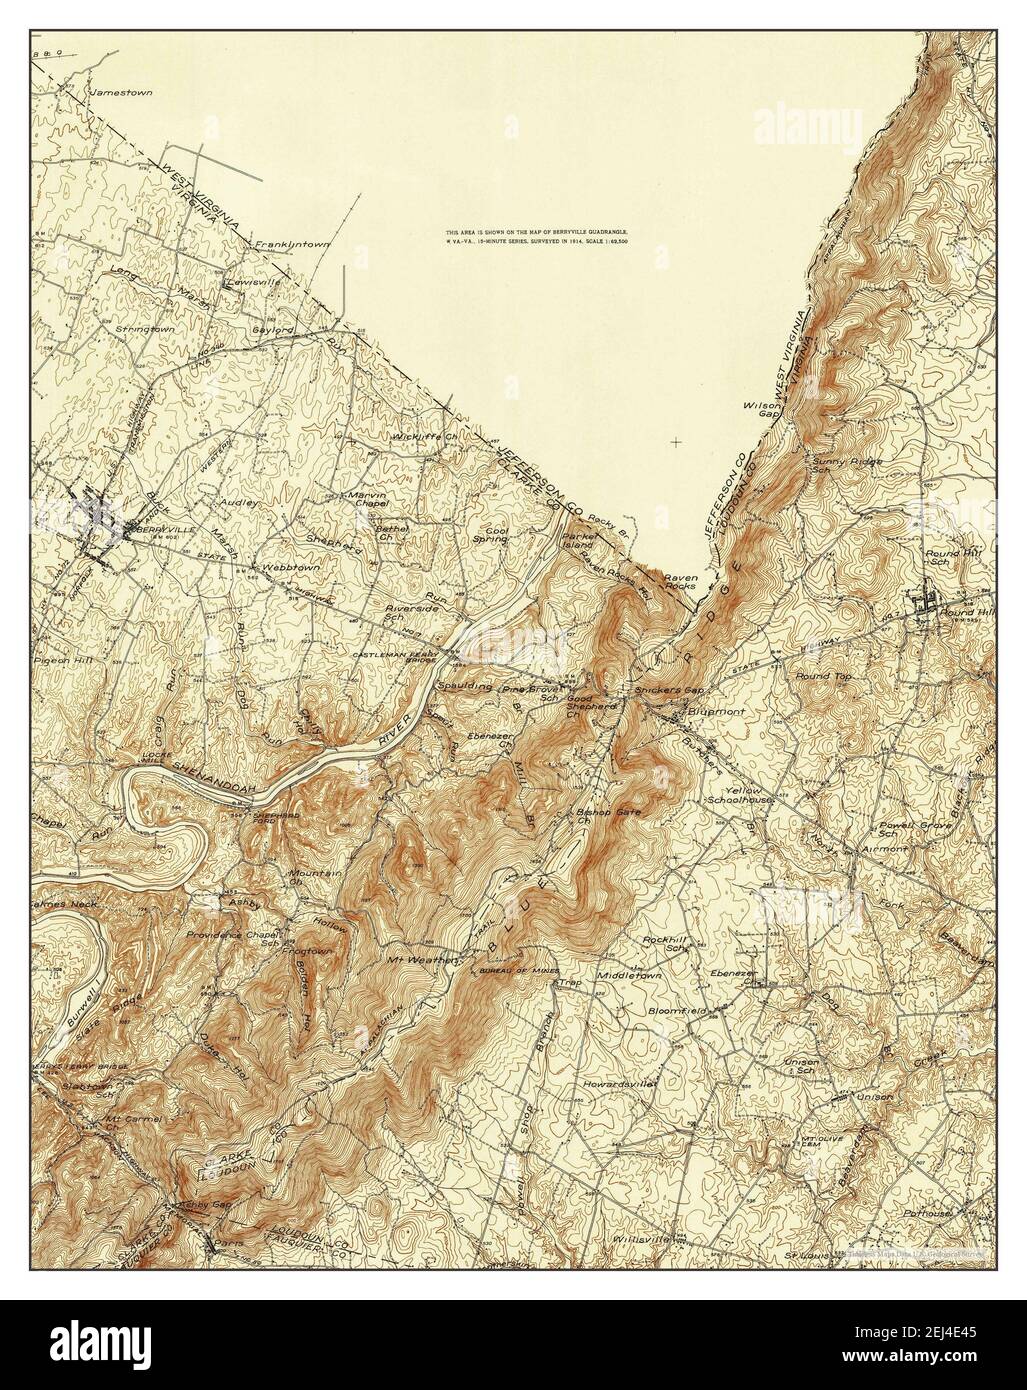 Berryville, Virginia, map 1939, 1:48000, United States of America by Timeless Maps, data U.S. Geological Survey Stock Photo